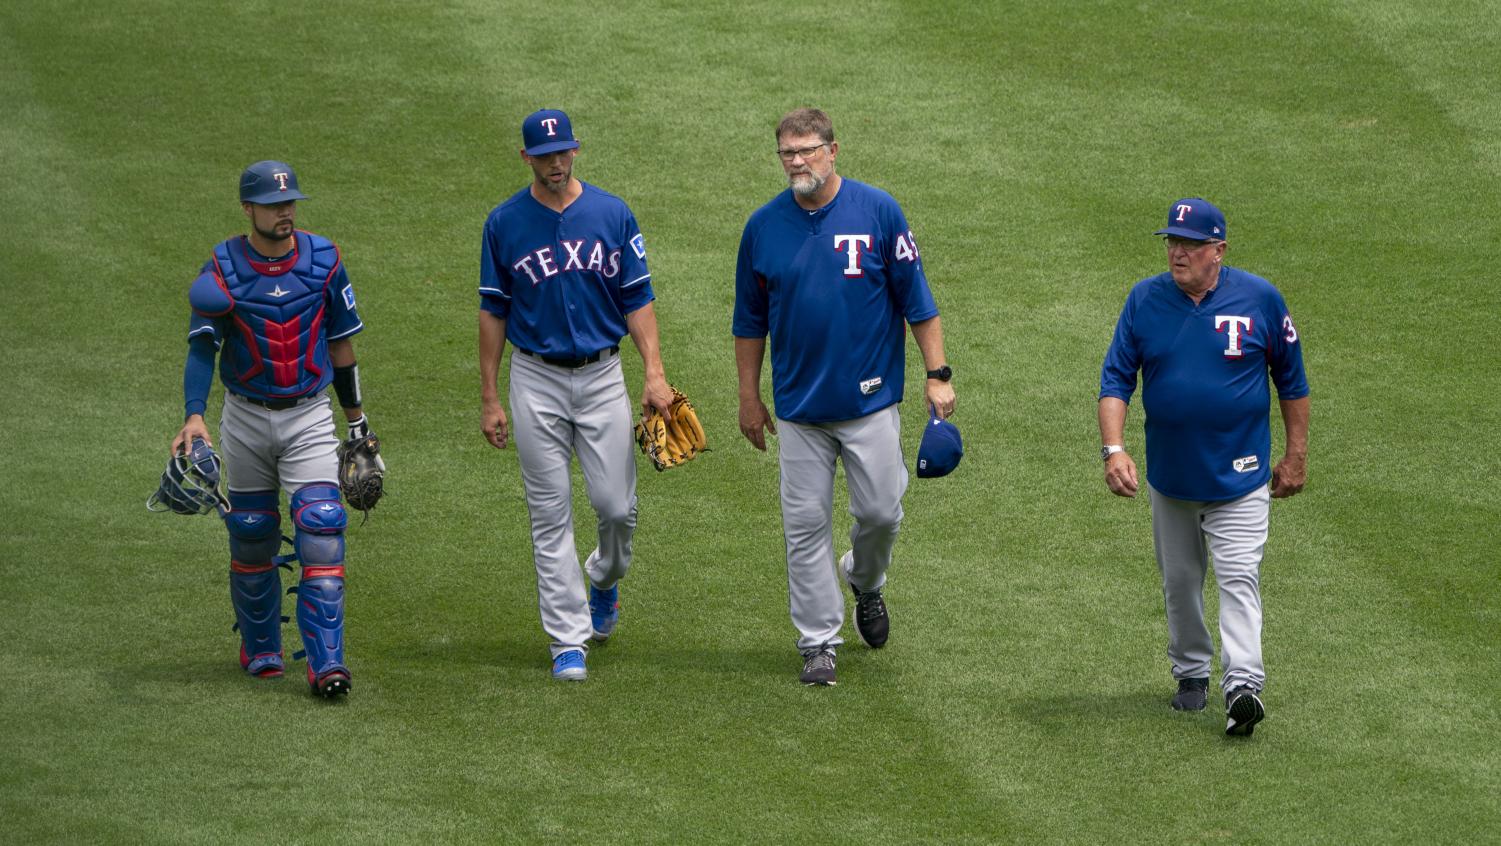 Rangers dealing with disappointment heading into offseason